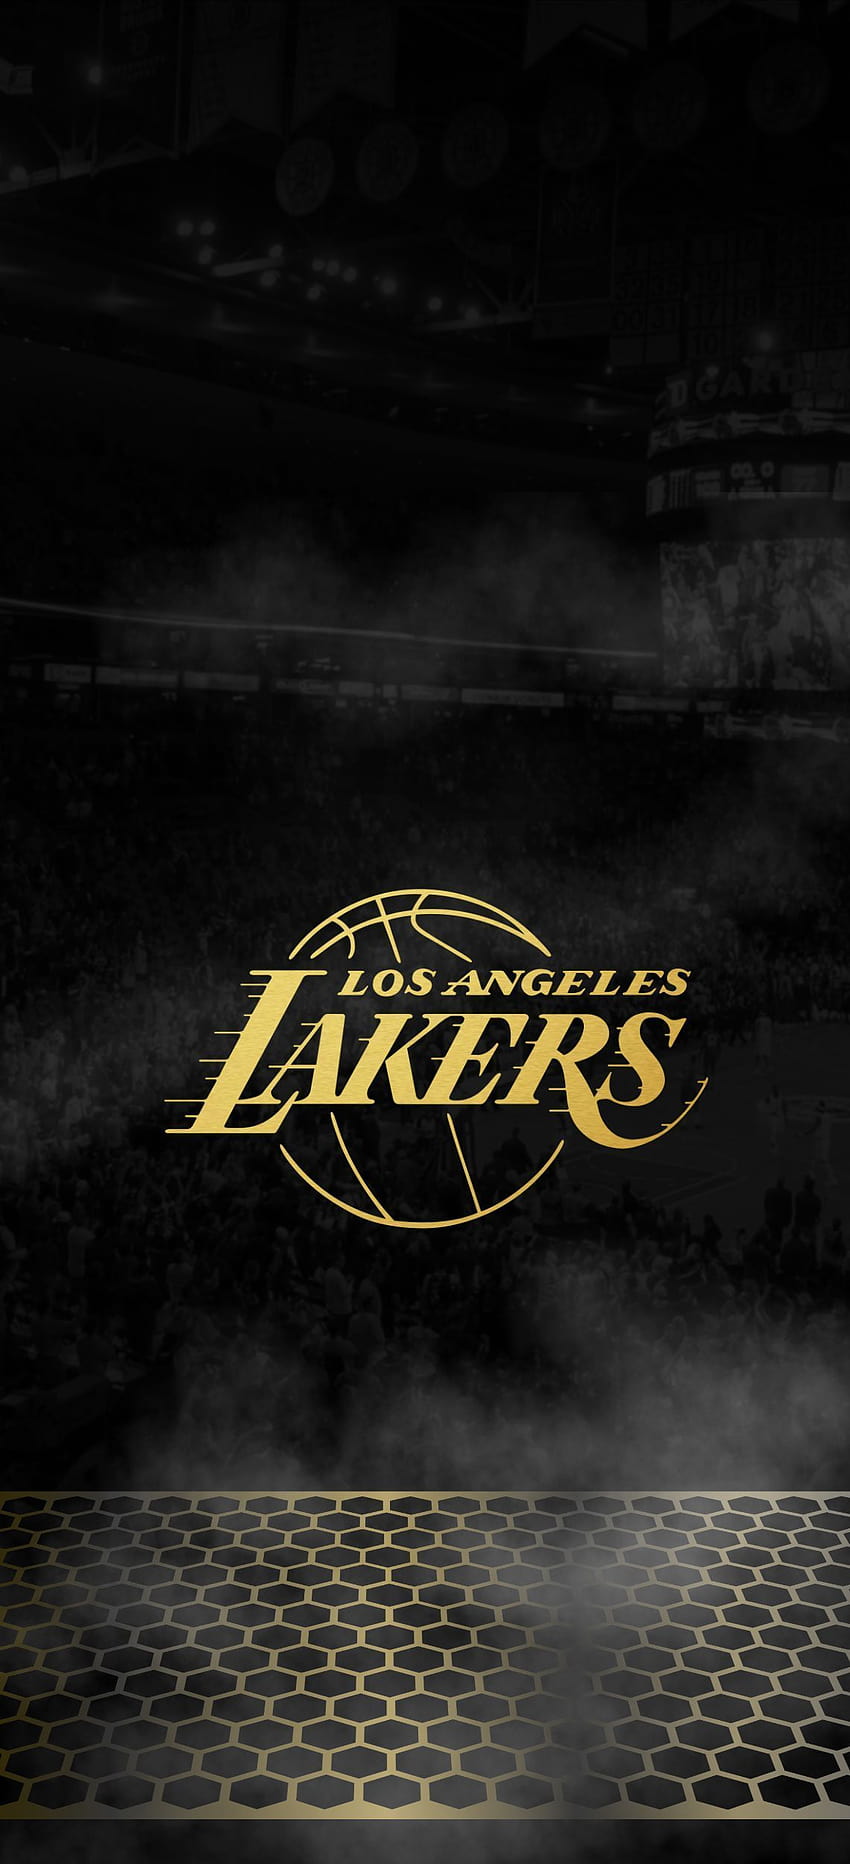 Los Angeles Lakers Backgrounds NBA Team Los Angeles Lakers iPhone Backgrounds HD phone wallpaper